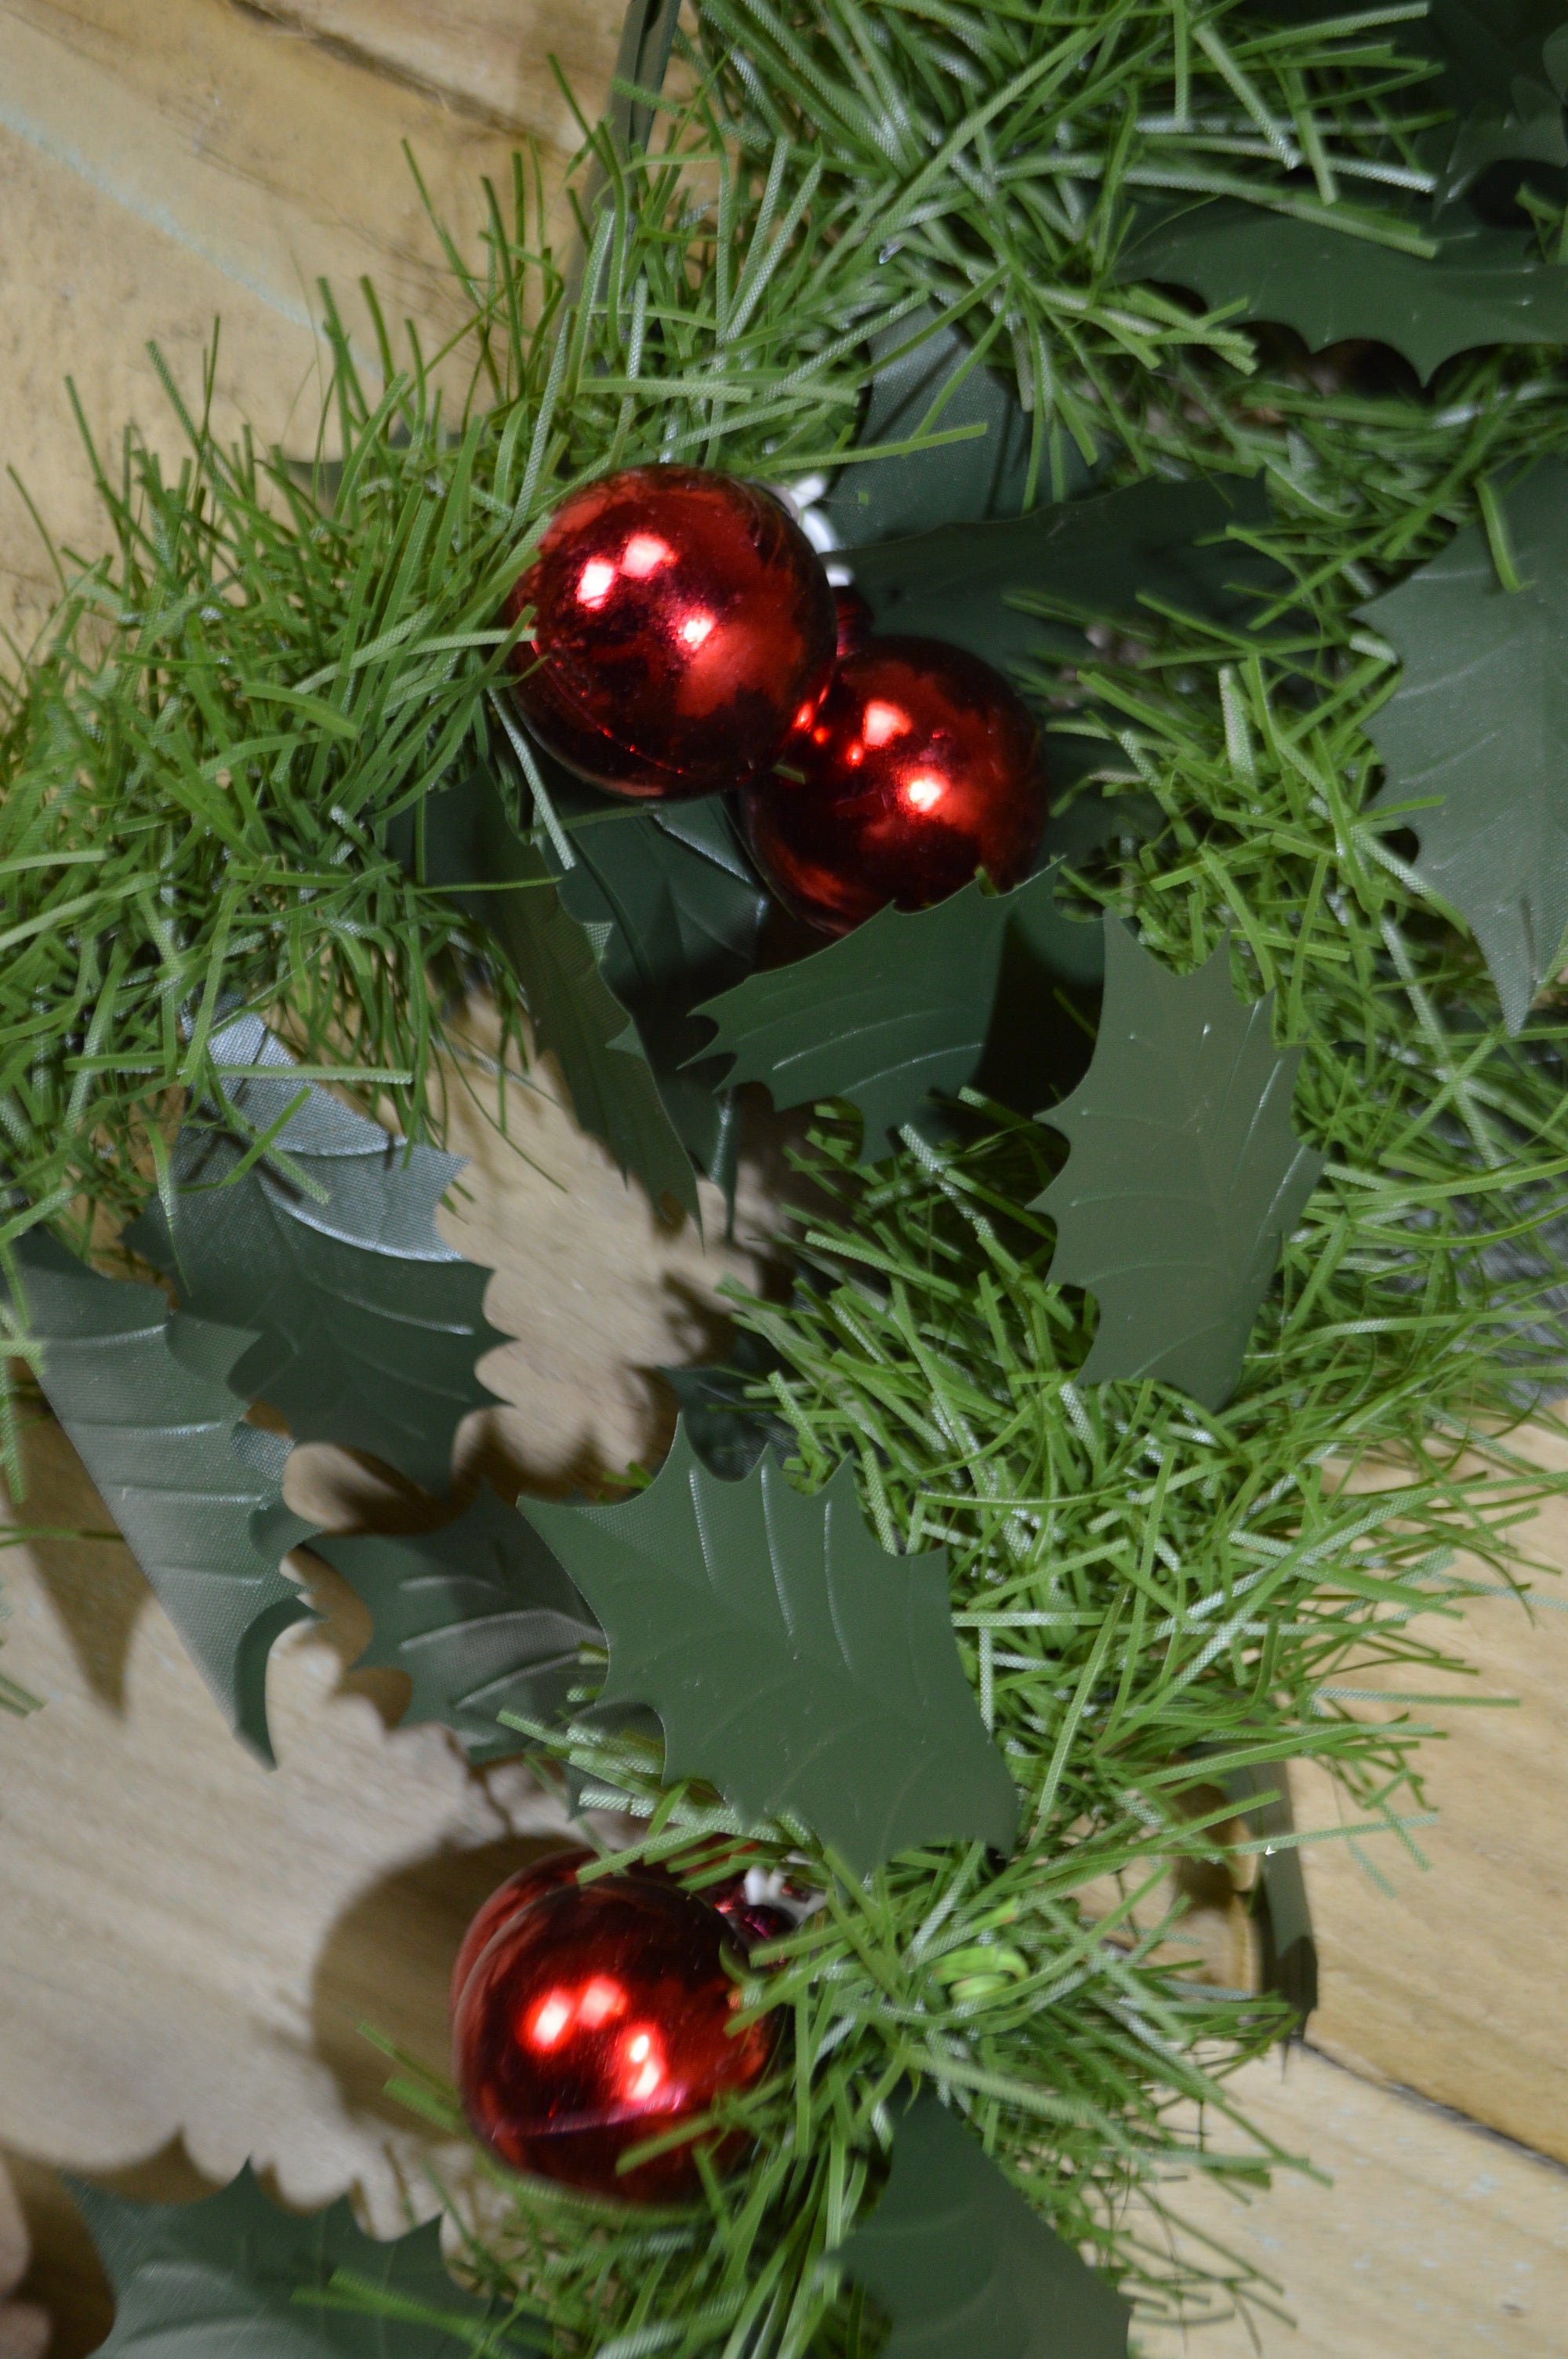 2.7m x 12cm Christmas Green Tinsel Garland with Holly & Baubles